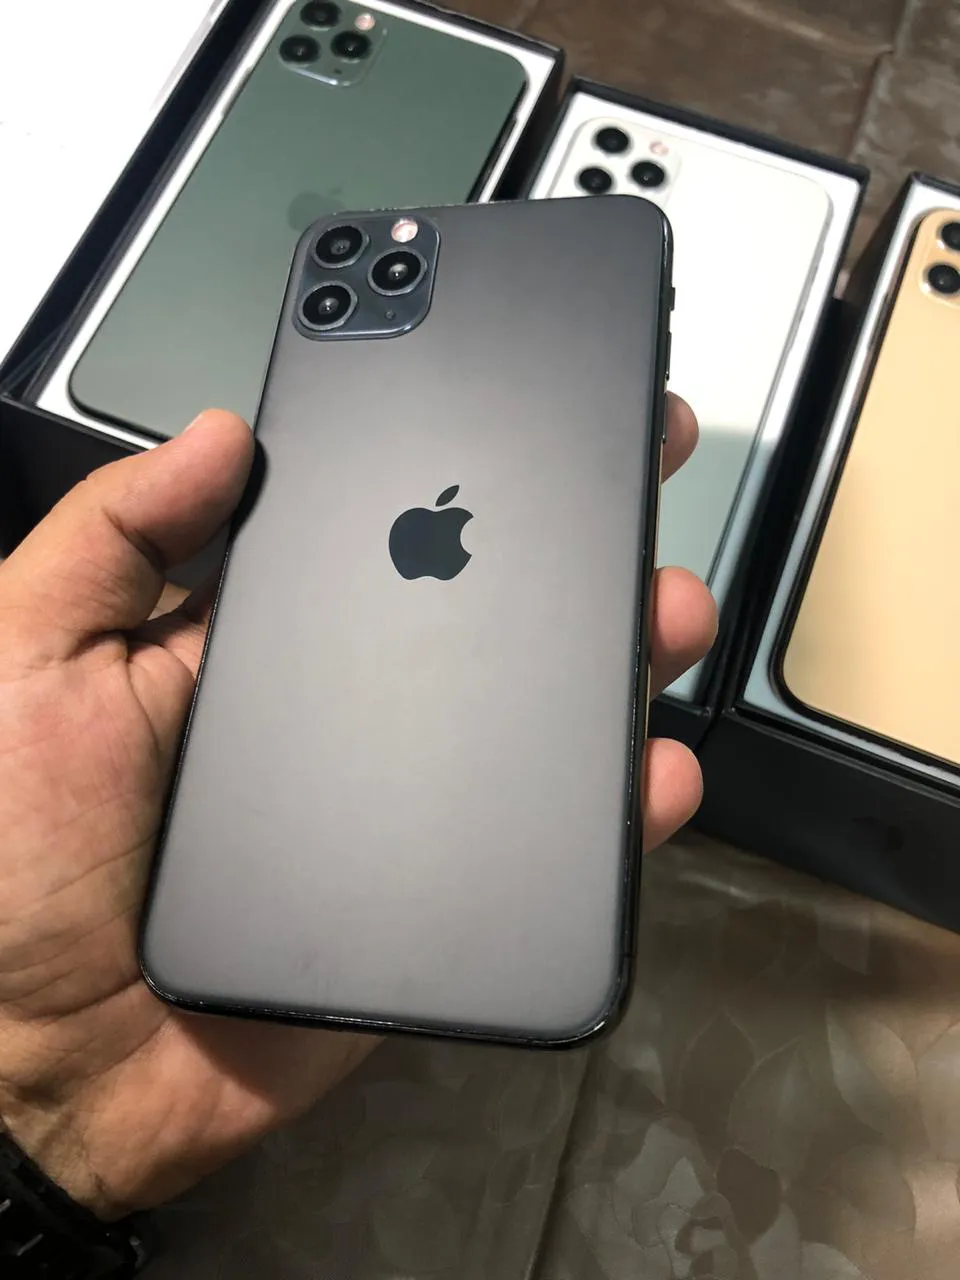 Iphone 11 Pro Max Turkish A Plus Master Copy Used Mobile Phone For Sale In Sindh